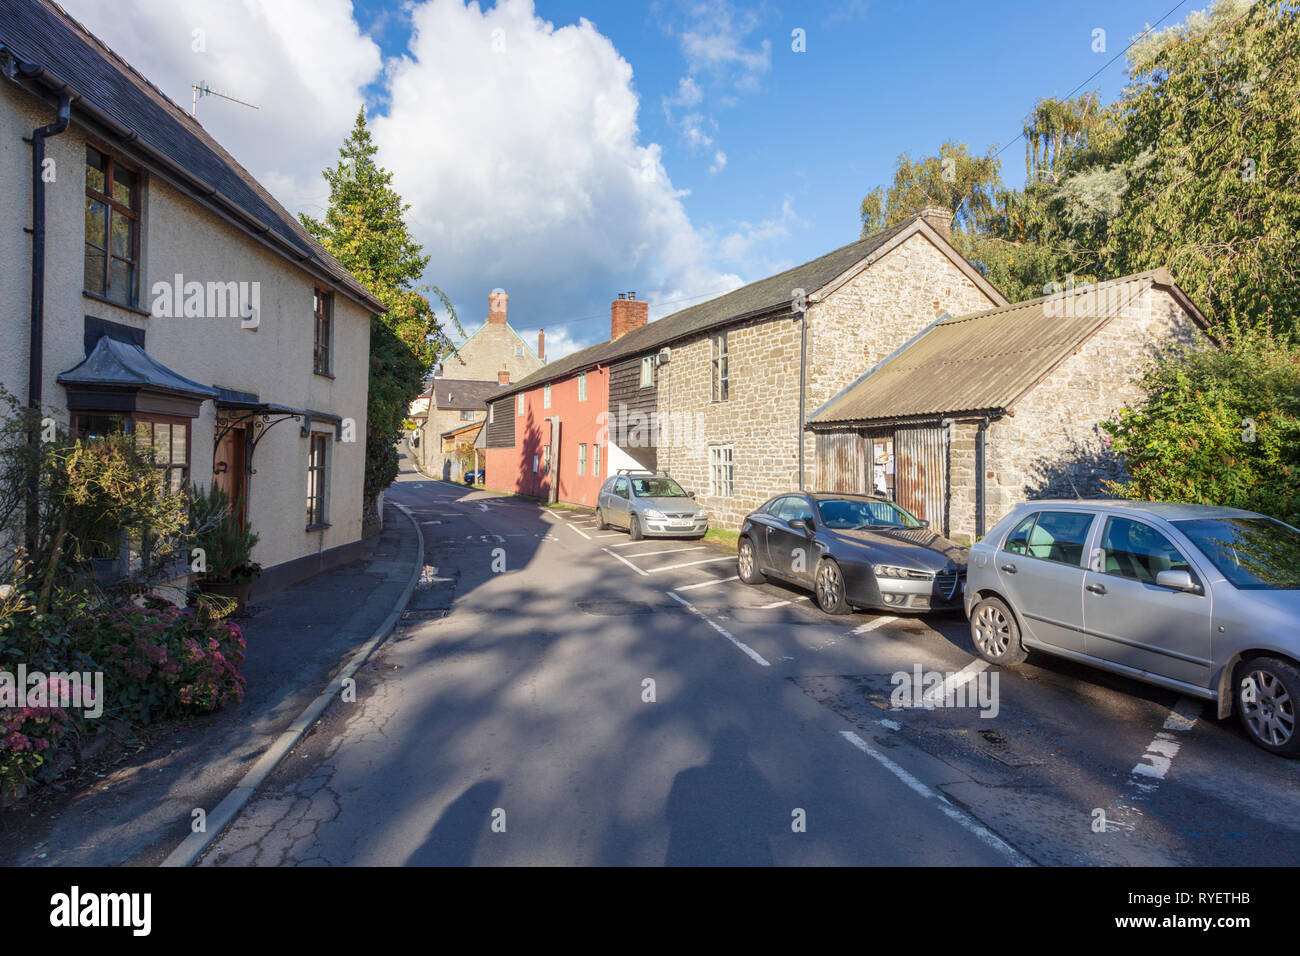 Narrow street with cottages and converted barn in the pretty village of Clun, Shropshire, UK Stock Photo